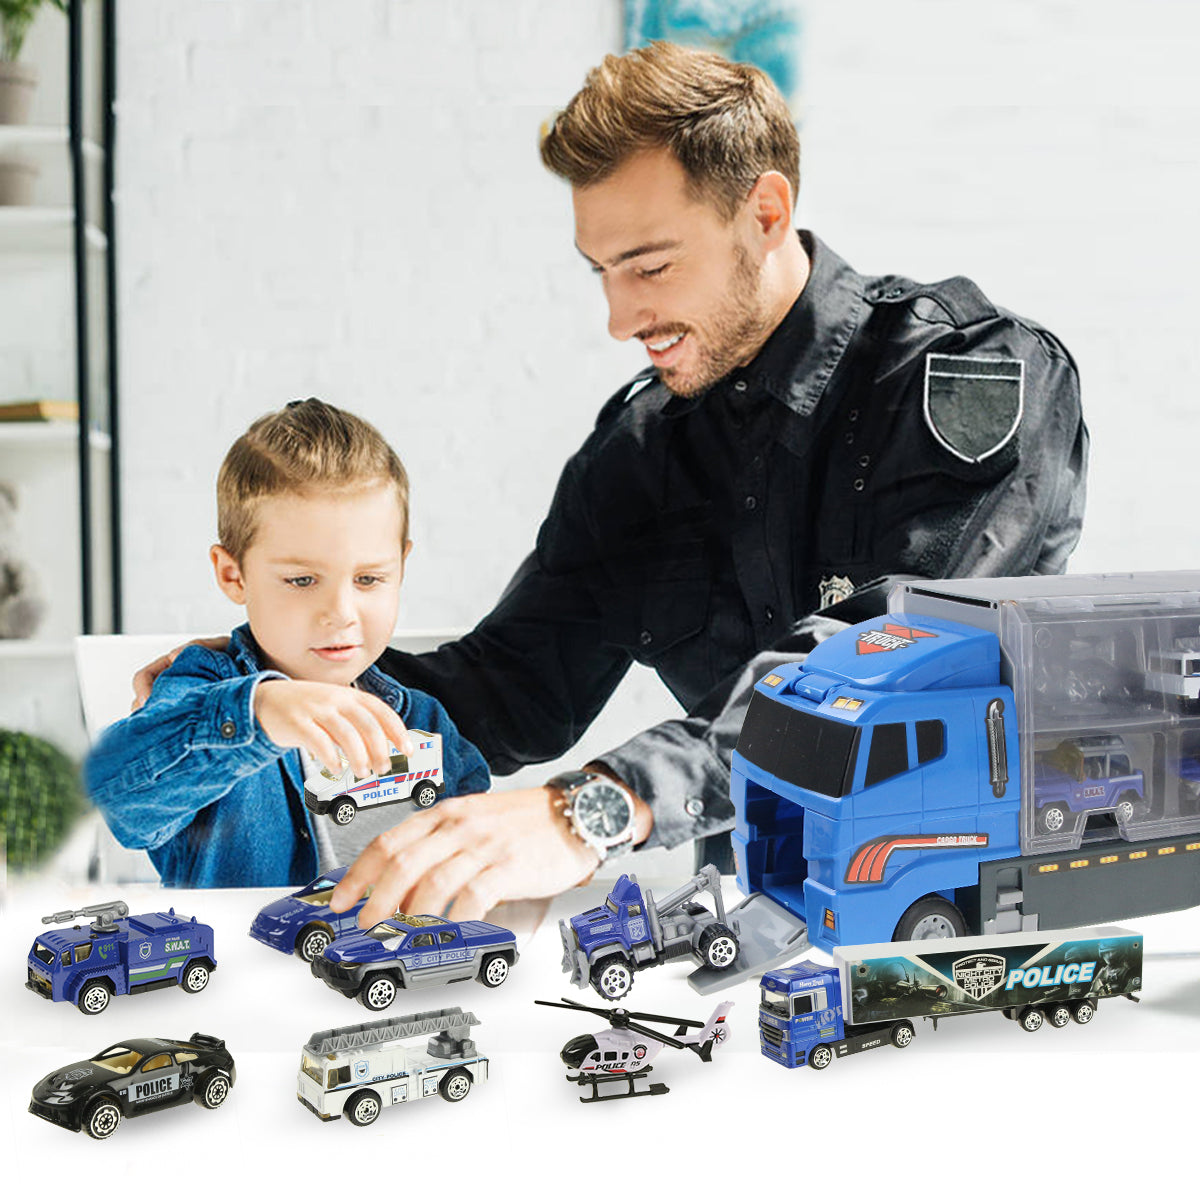 Joyfia 10 in 1 Police Toys, Die-cast Police Patrol Rescue Truck, Mini Police Vehicles in Carrier Car Toy Playset for 3+ Years Old Kids Boys Girls